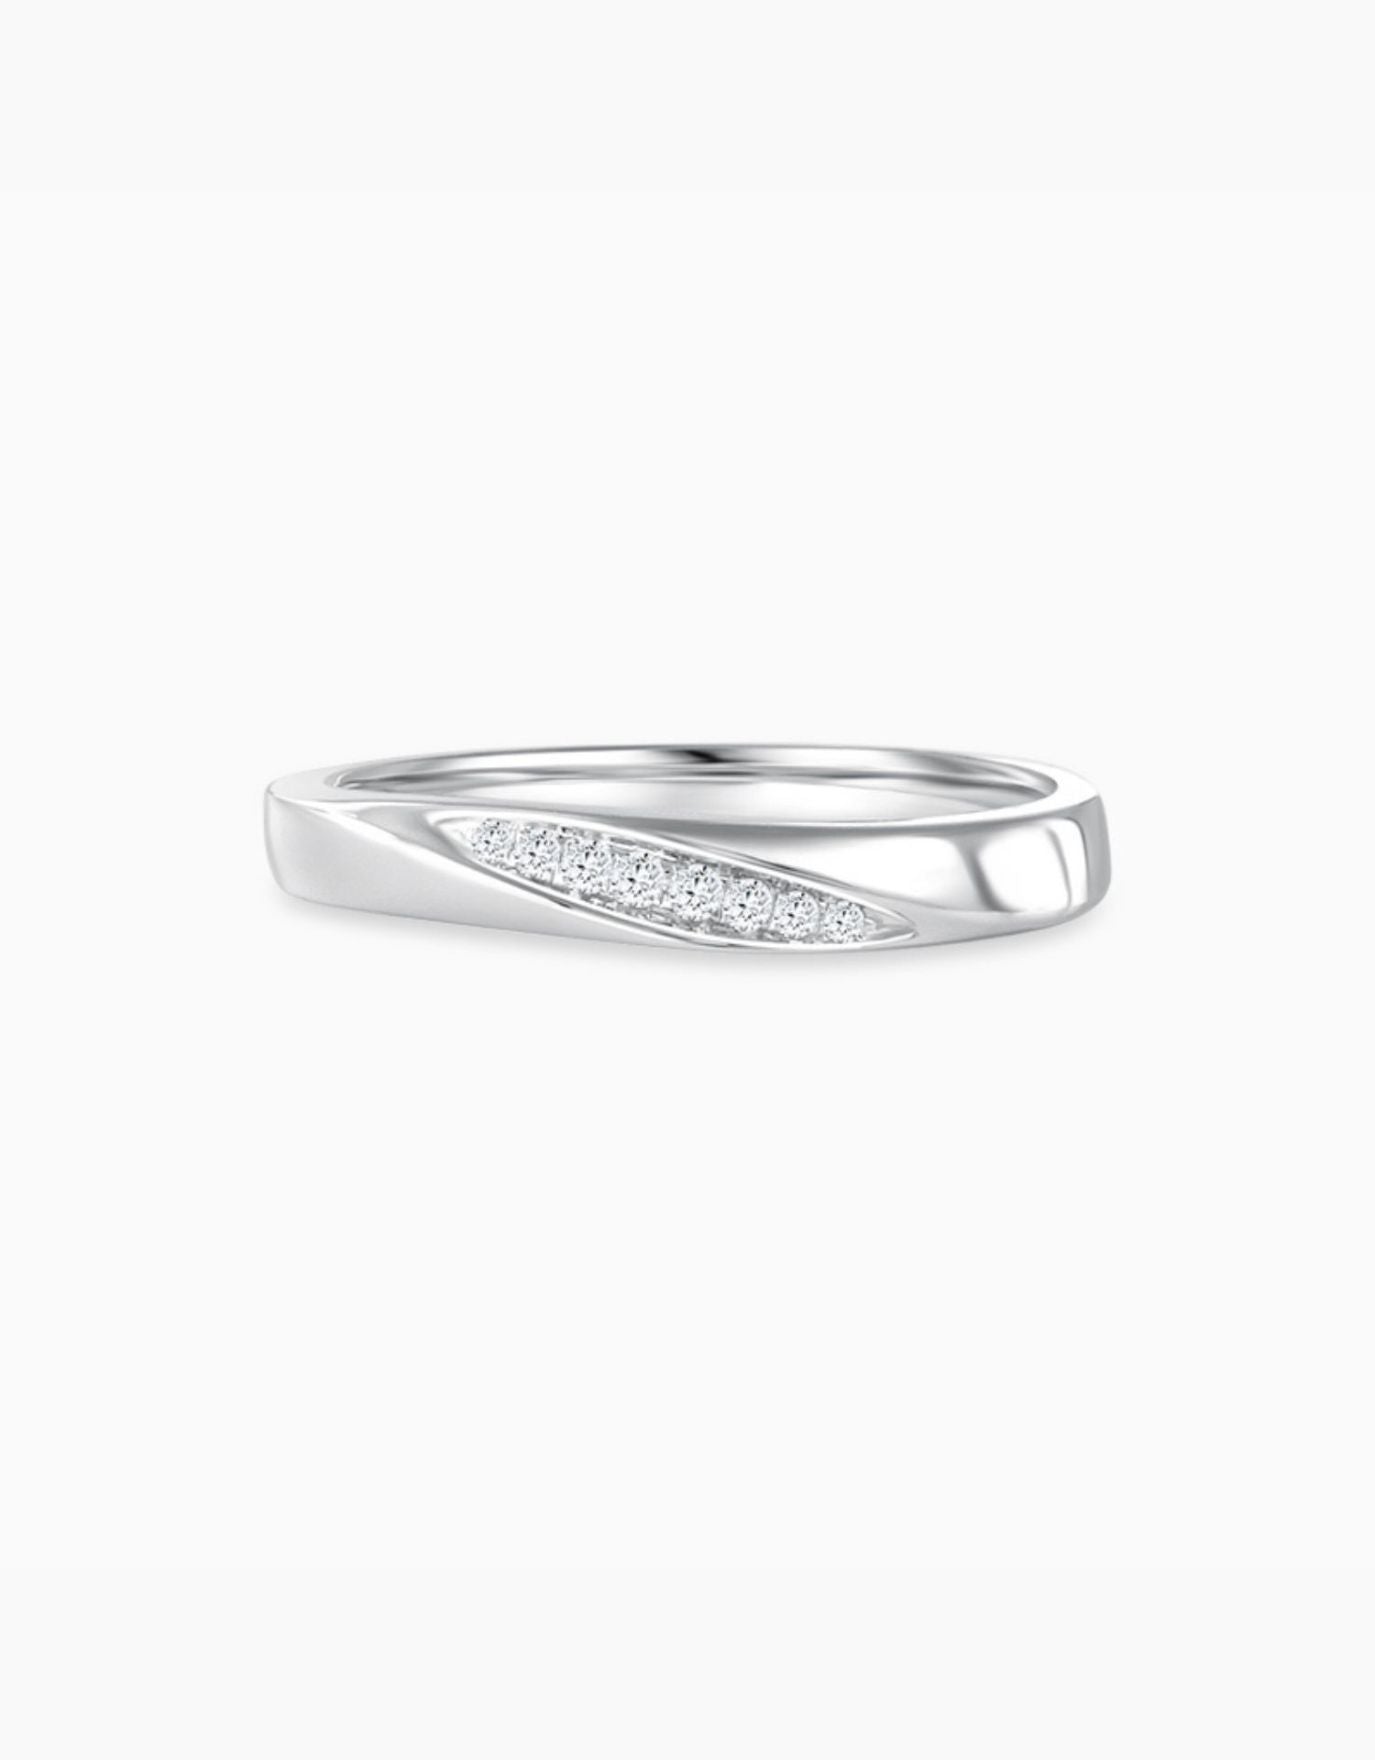 LVC Perfection Classic Wedding Band with Diamonds